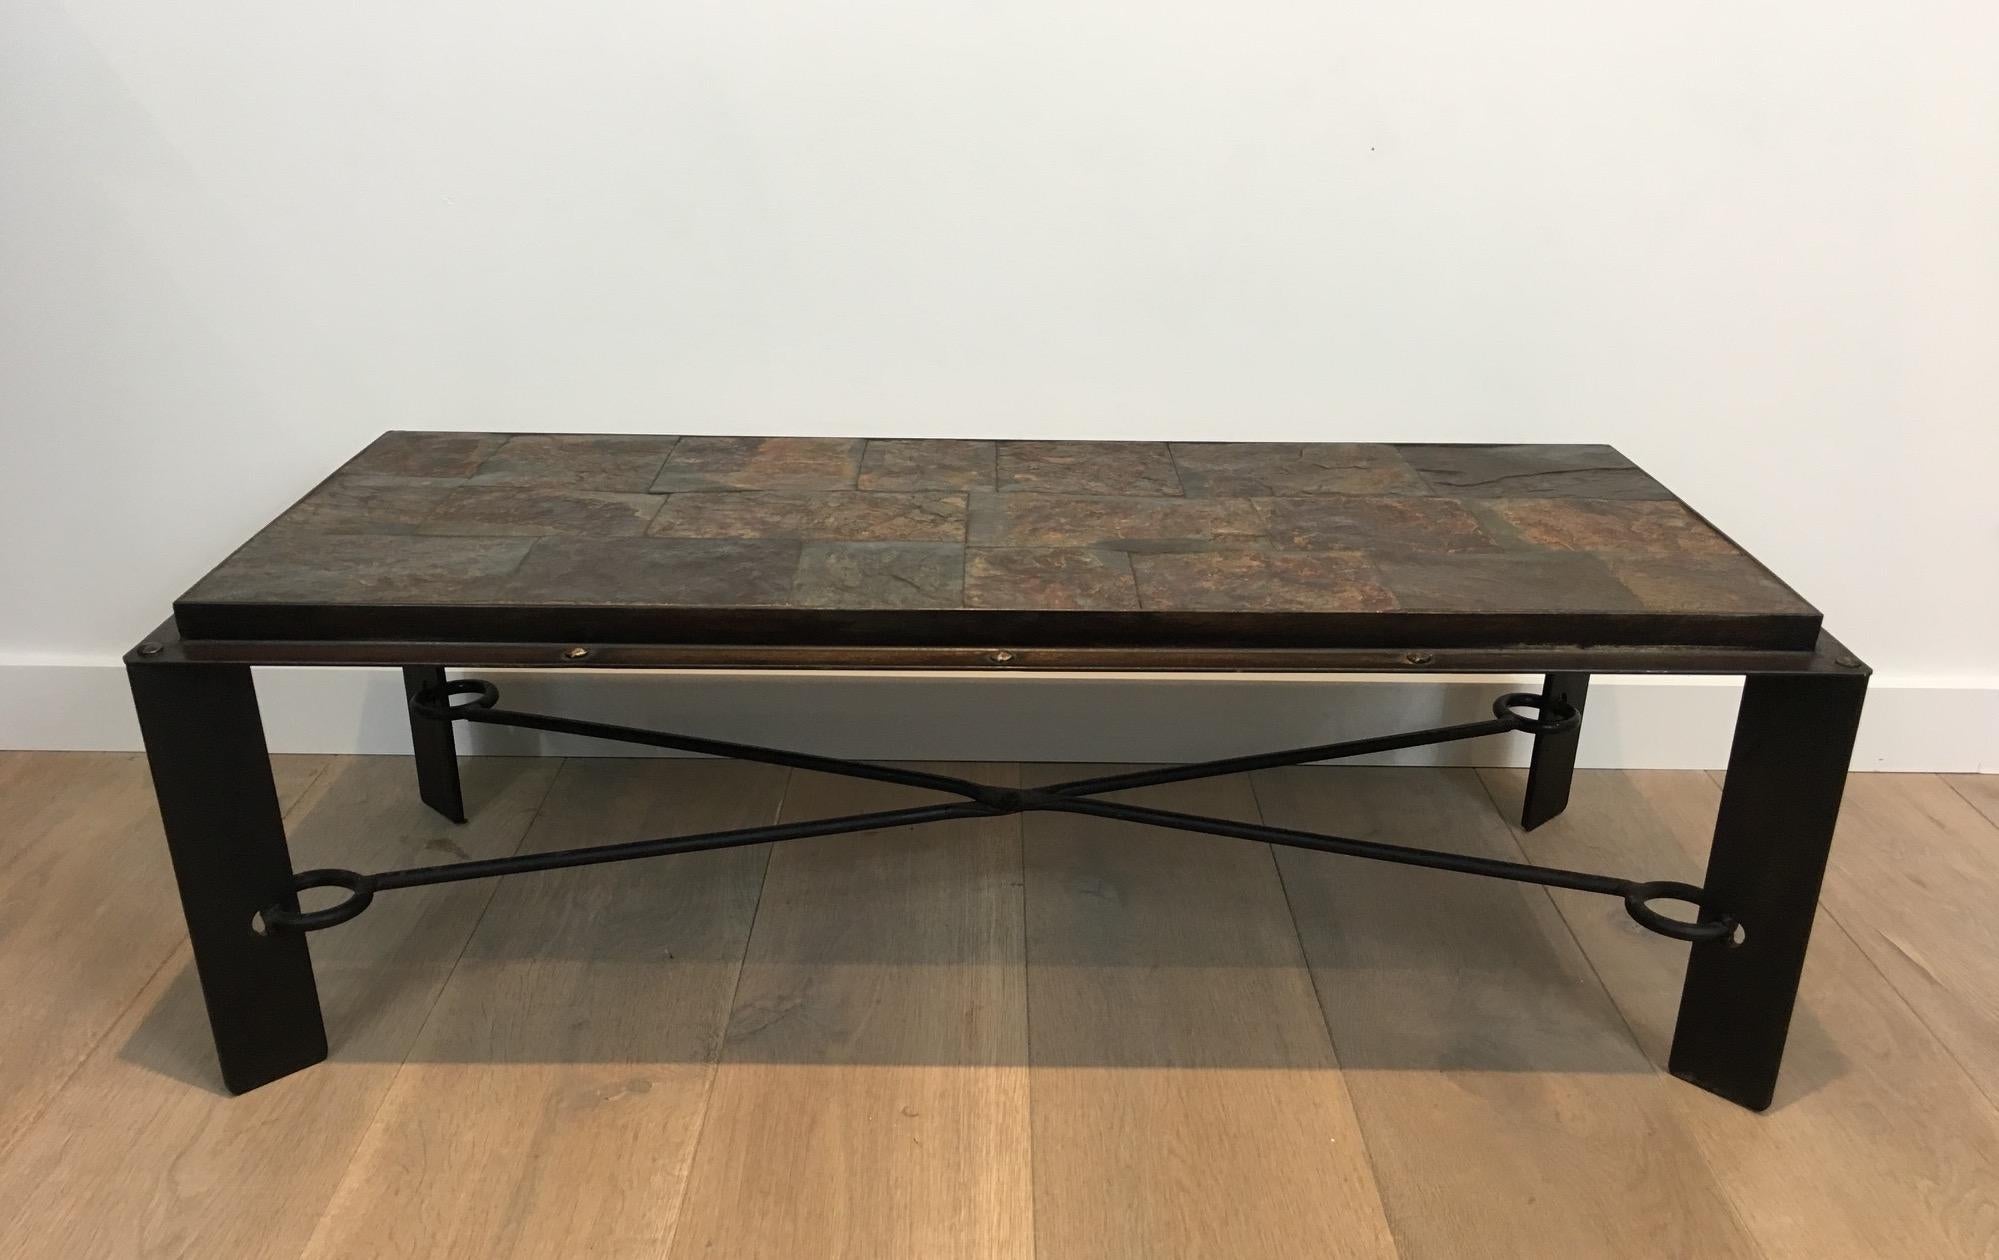 Rare Steel and Iron Coffee Table with Lava Stone Top, circa 1940 For Sale 7